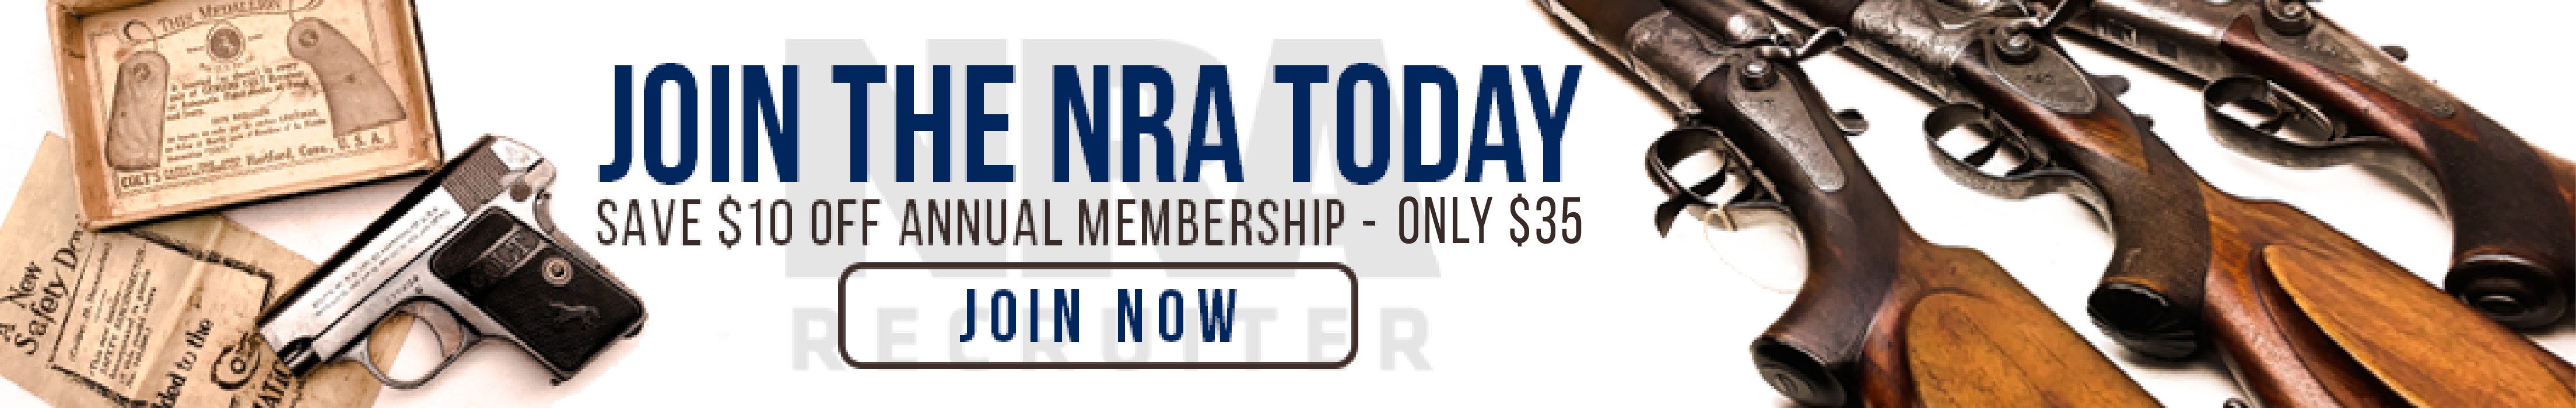 Join the NRA Today